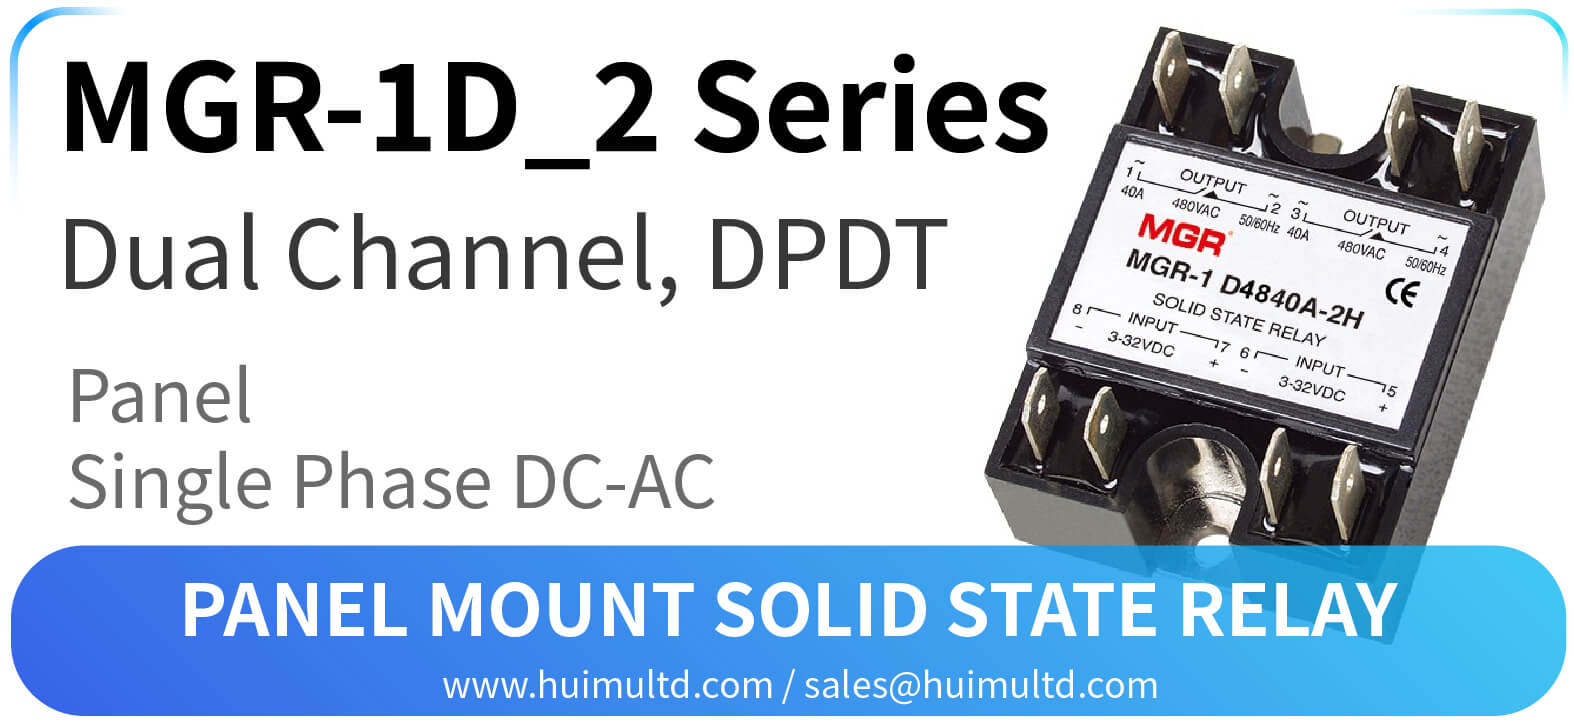 MGR-1D_2 Series Panel Mount Solid State Relay